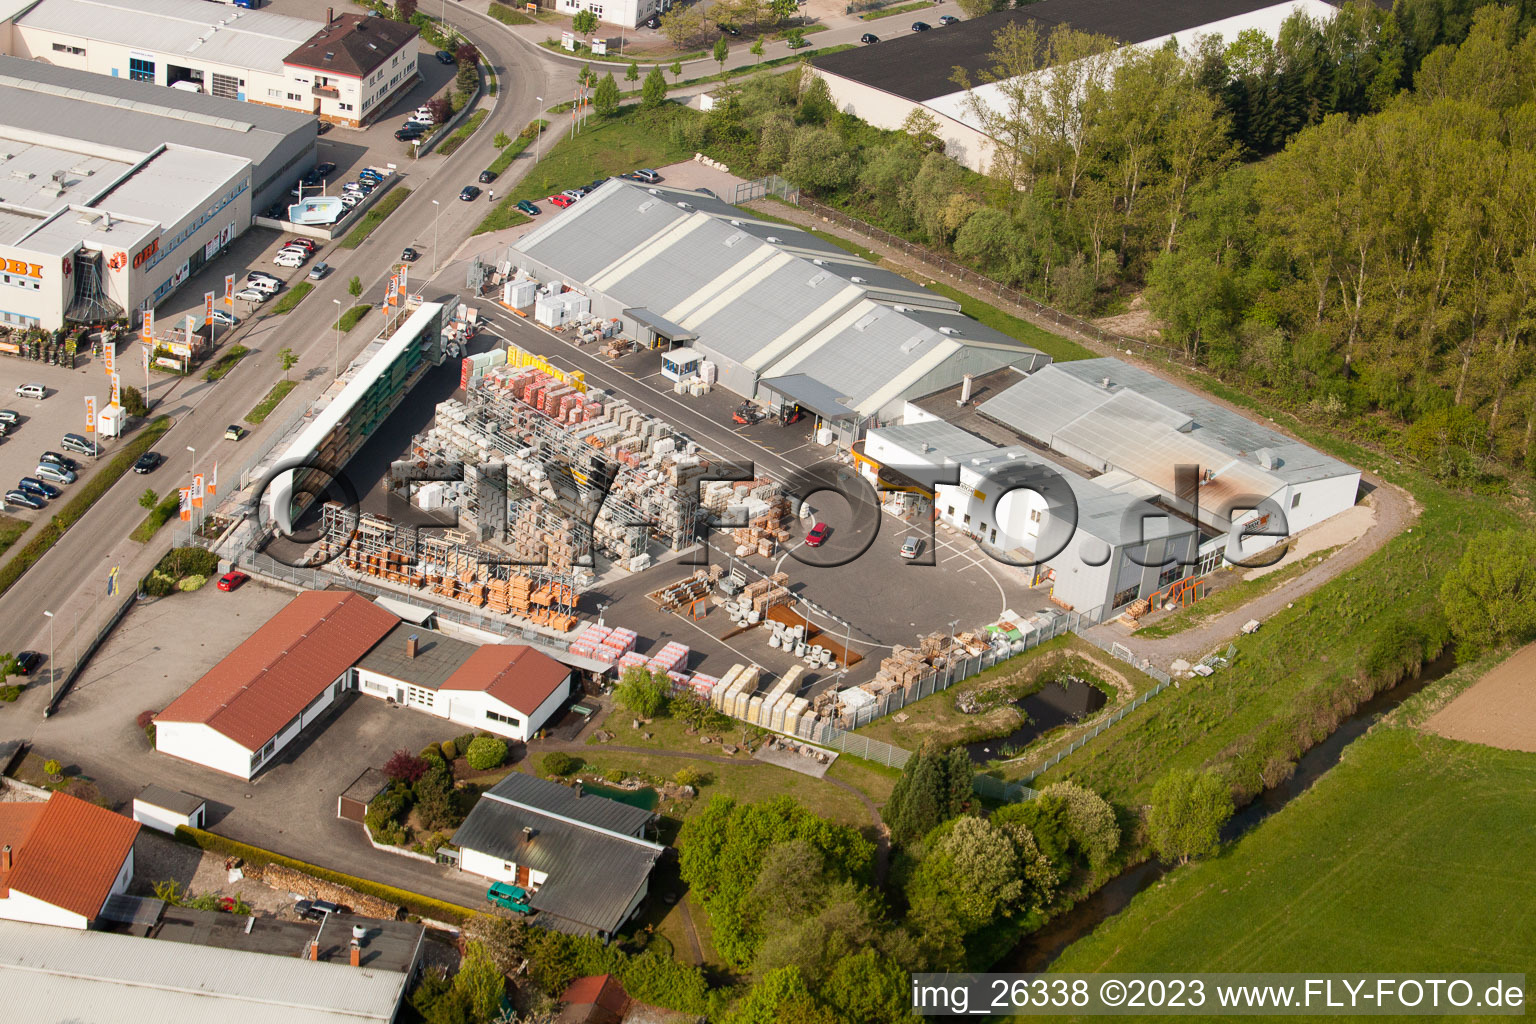 Oblique view of Minderlachen, UNION building materials trade in the district Minderslachen in Kandel in the state Rhineland-Palatinate, Germany